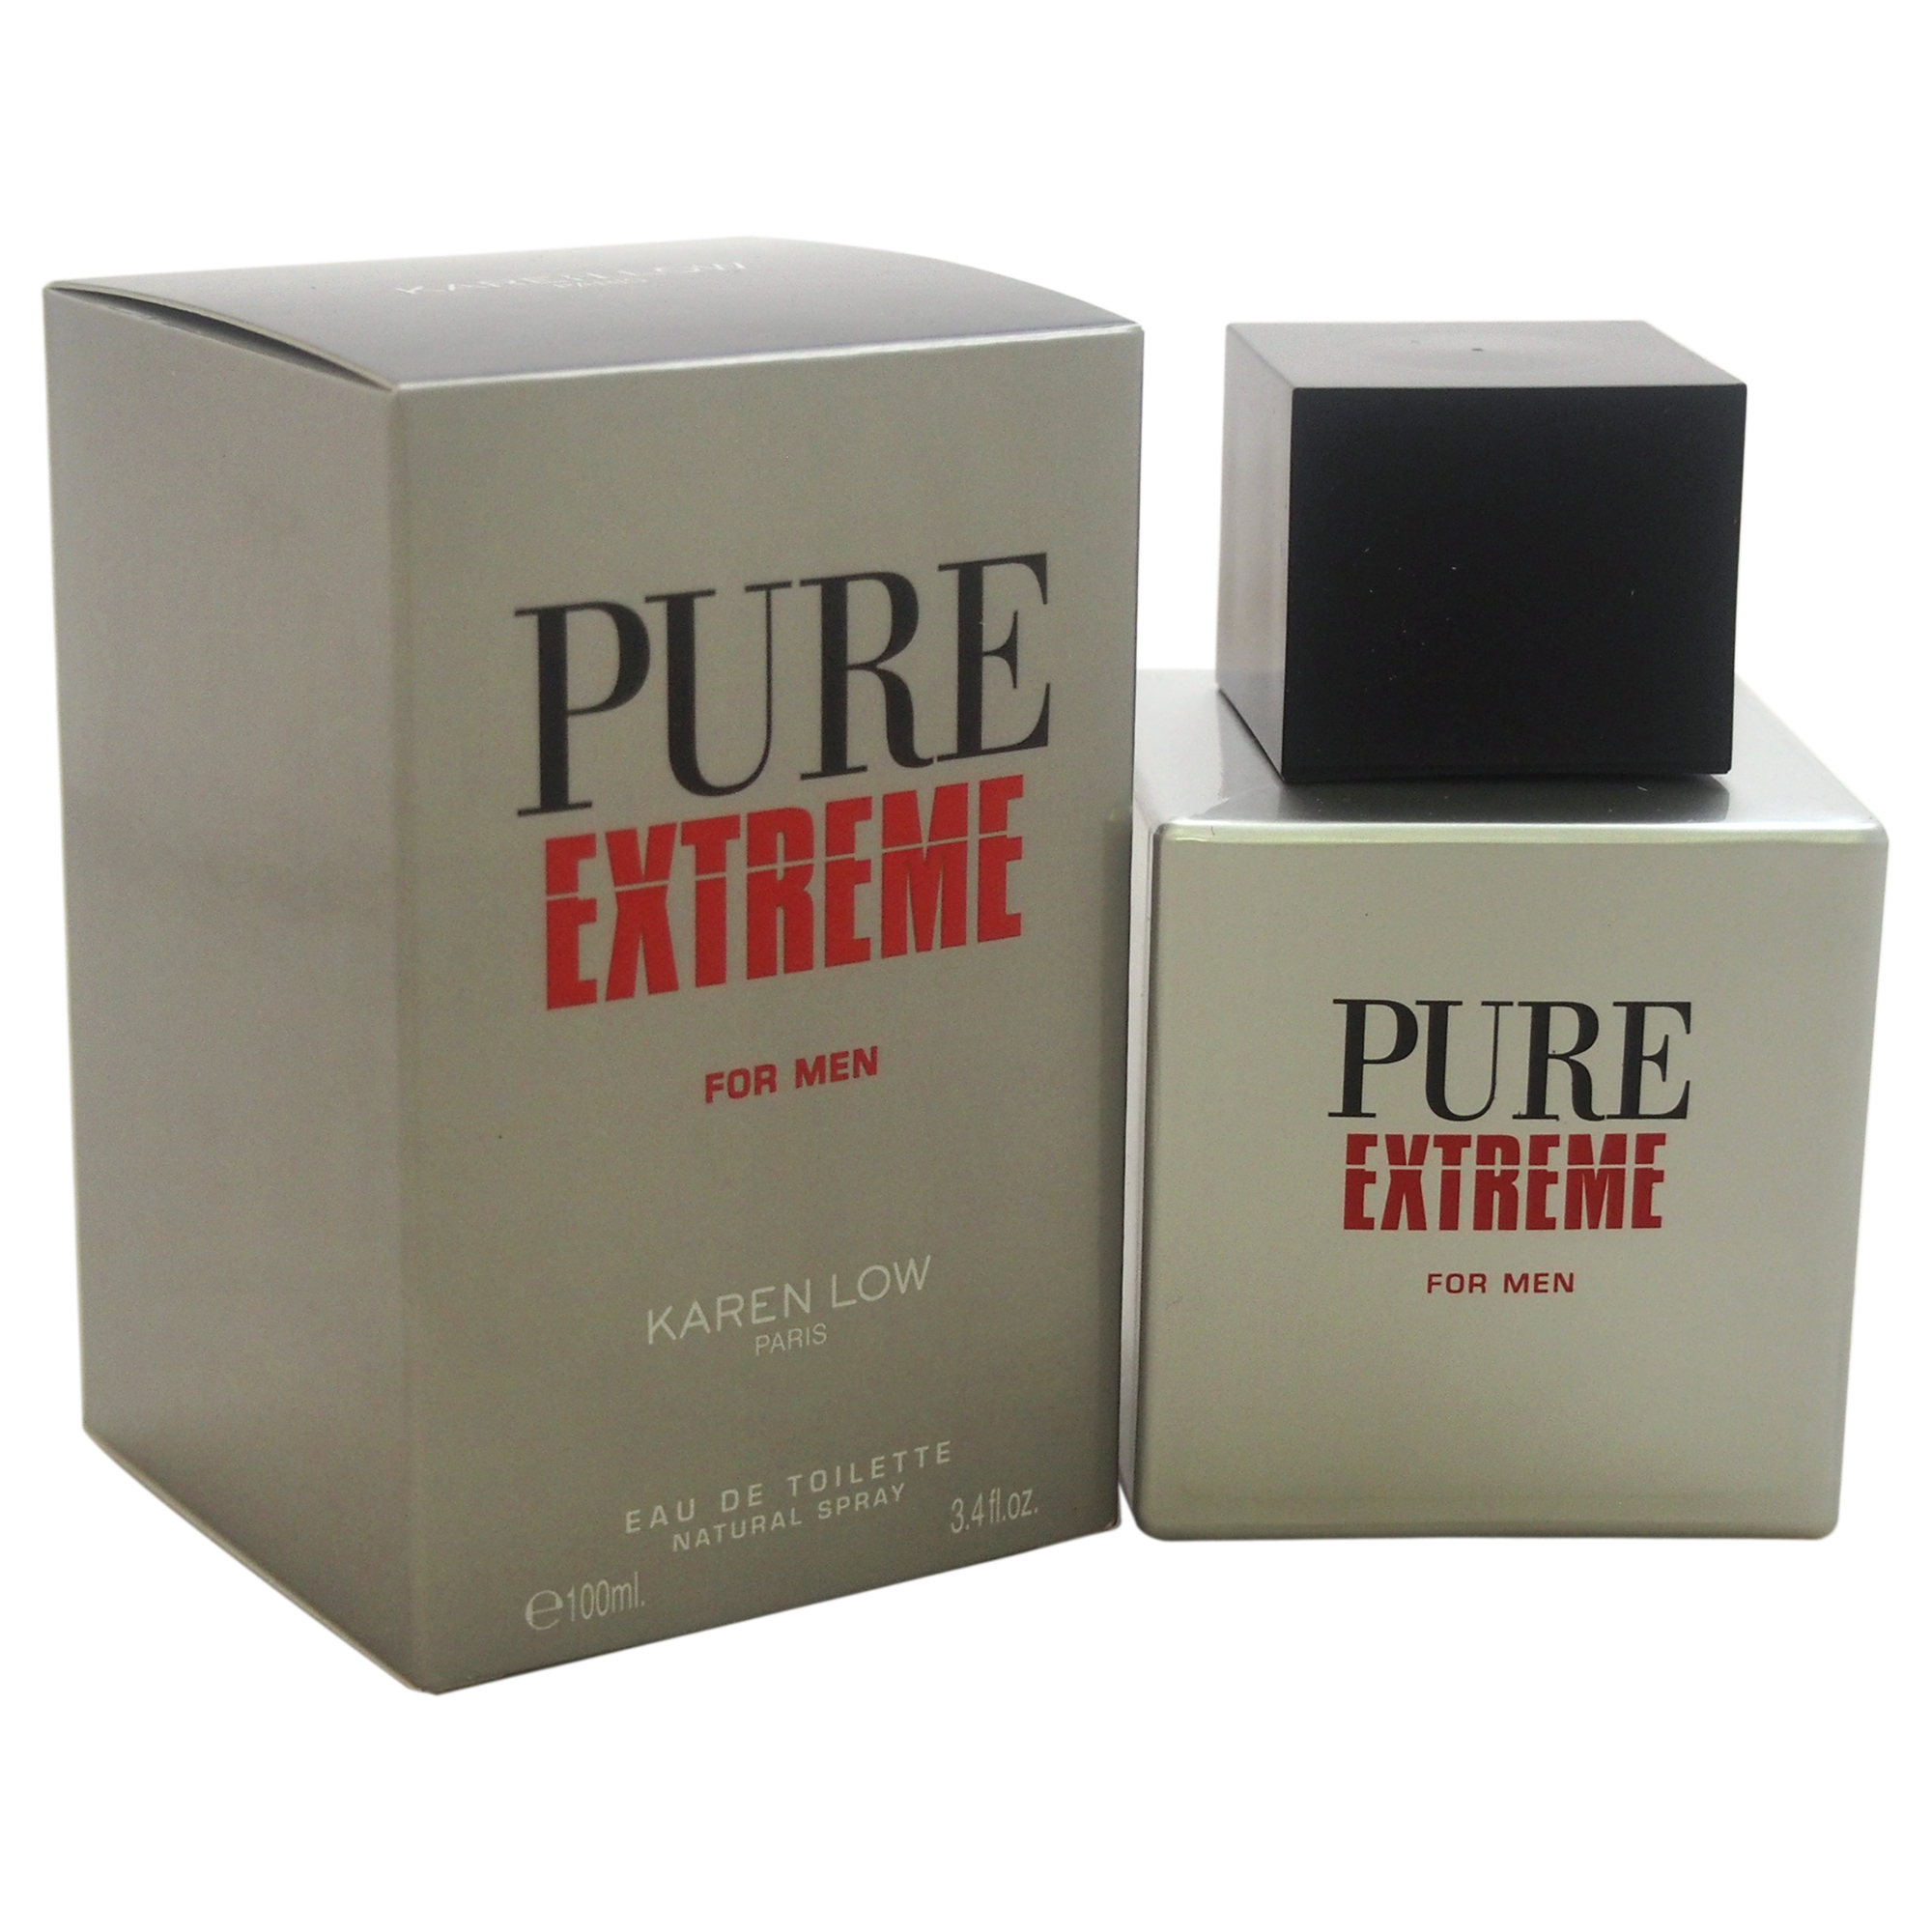 PURE EXTREME by Karen Low for Men - 3.4 oz EDT Spray